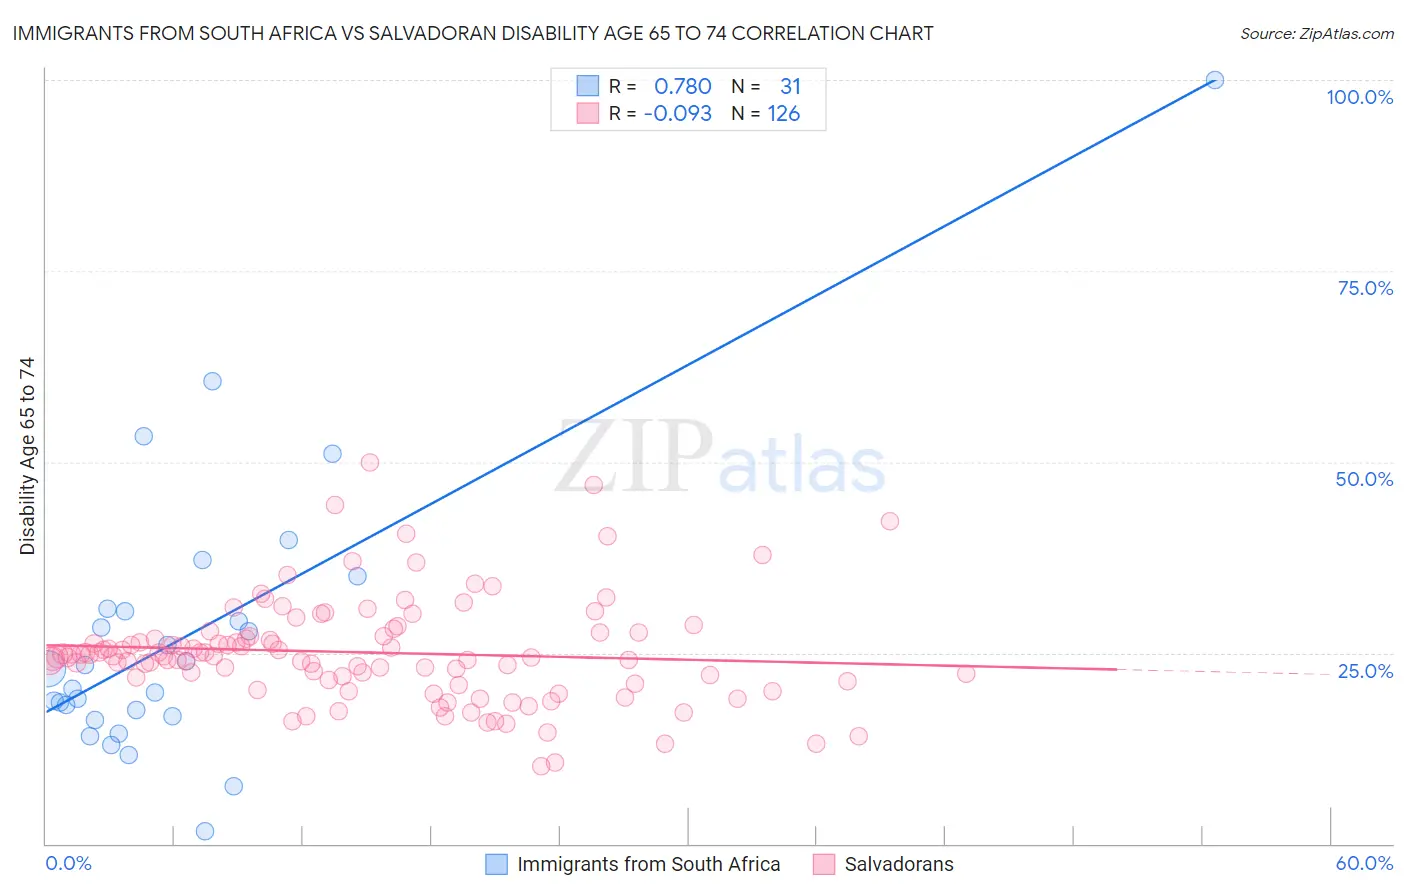 Immigrants from South Africa vs Salvadoran Disability Age 65 to 74